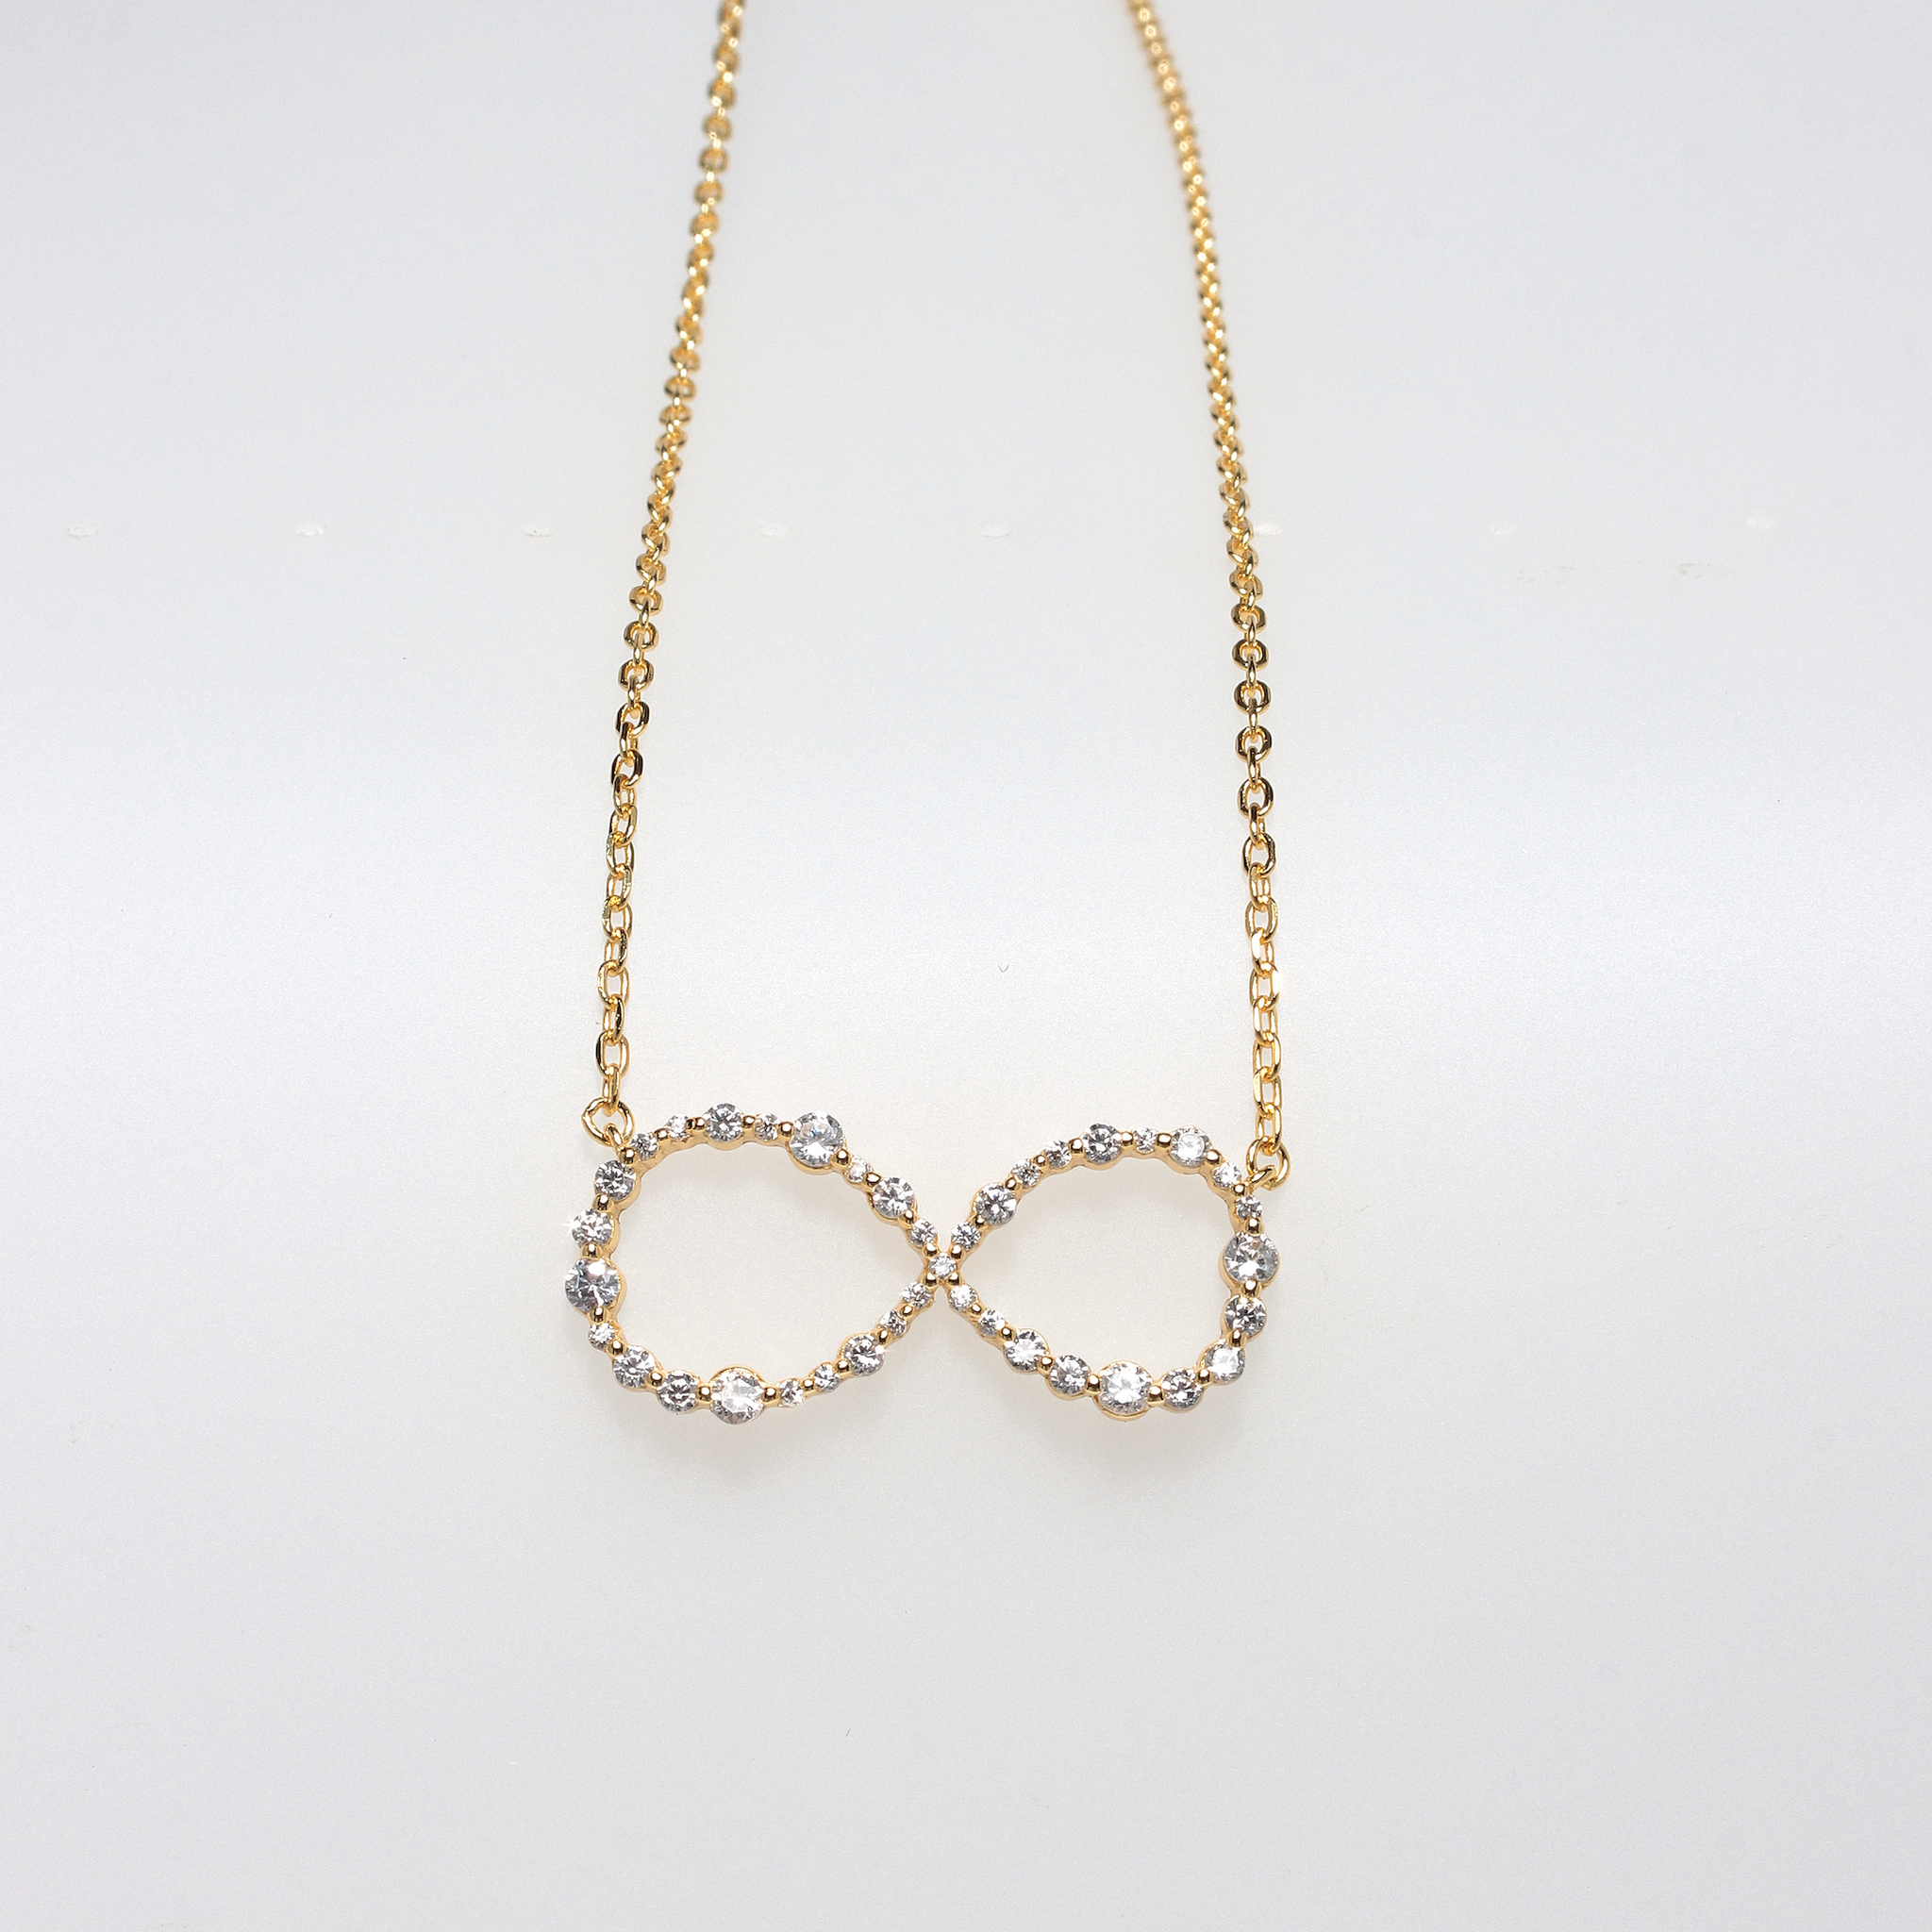 PARIS INFINITY ROUND STONES YELLOW GOLD 925 SILVER NECKLACE BY ANITA BRAND